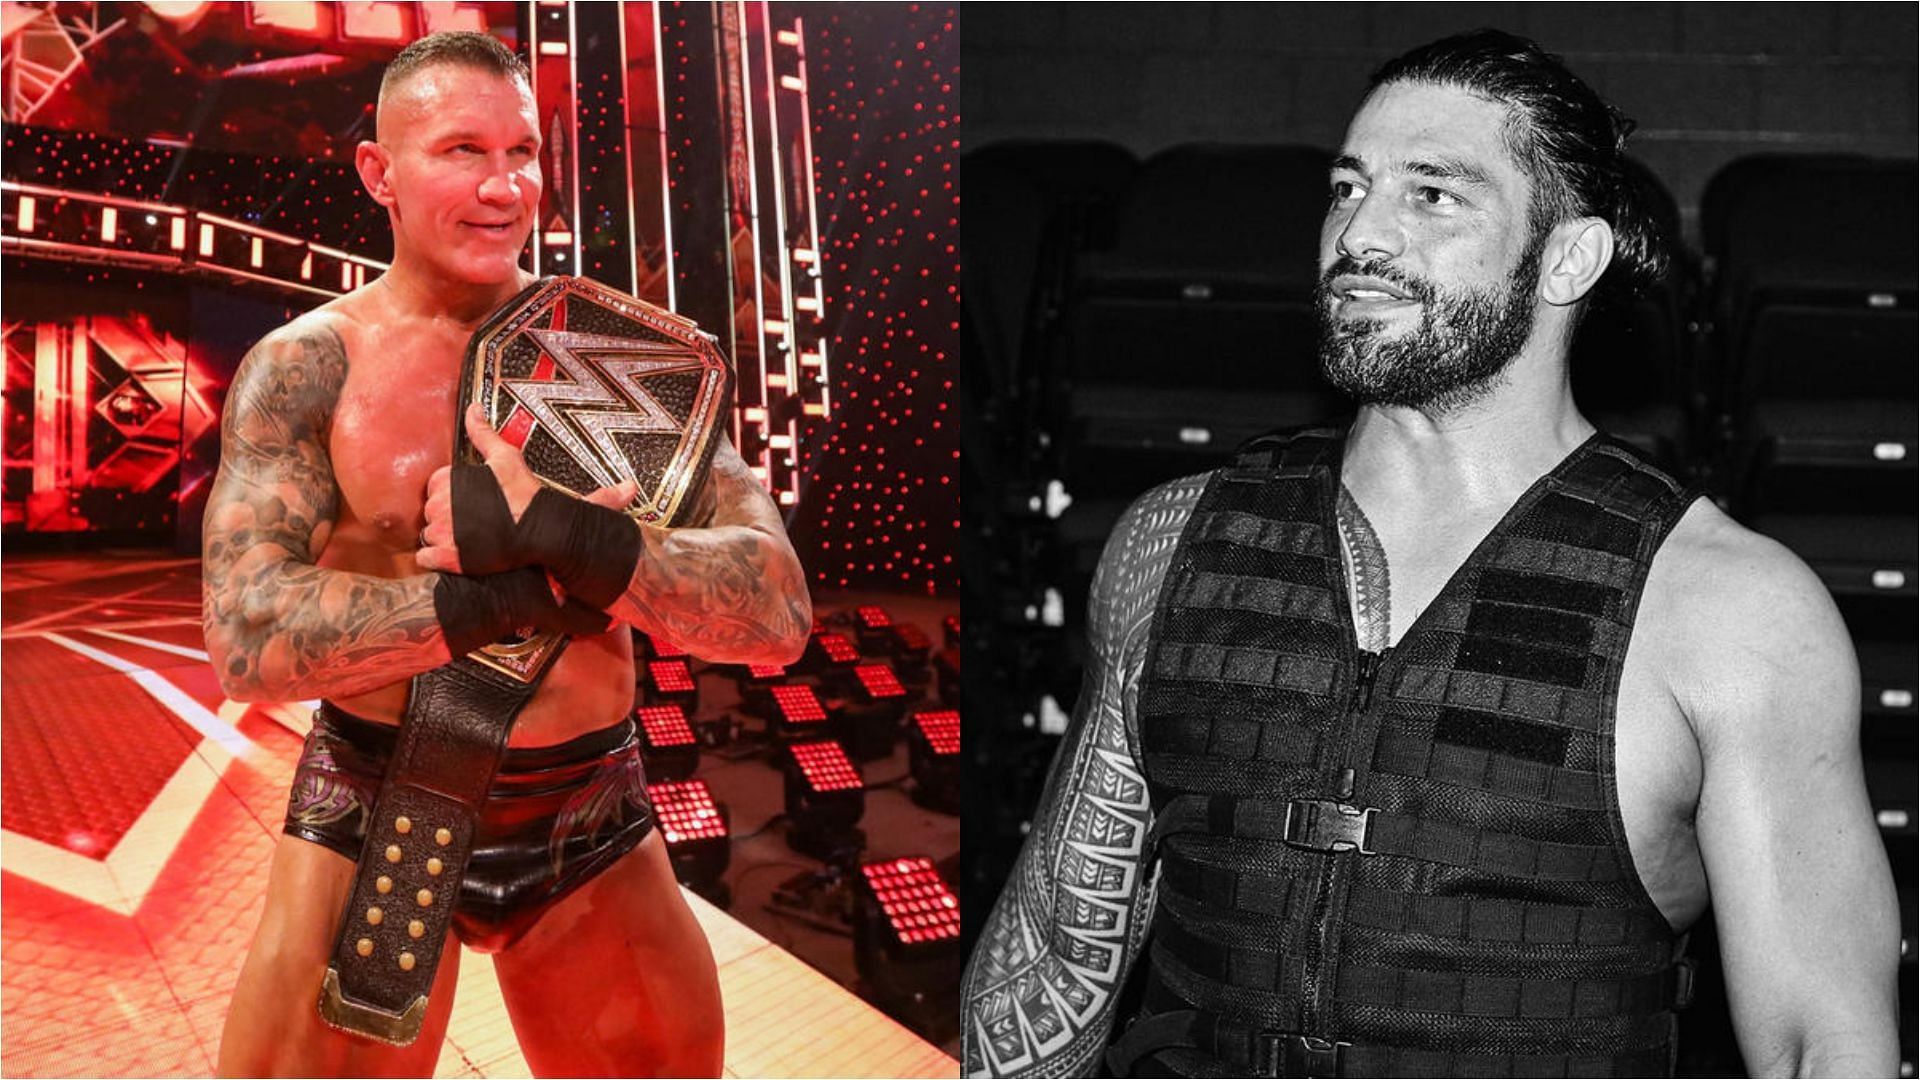 Many incredible WWE Superstars have made Survivor Series their own